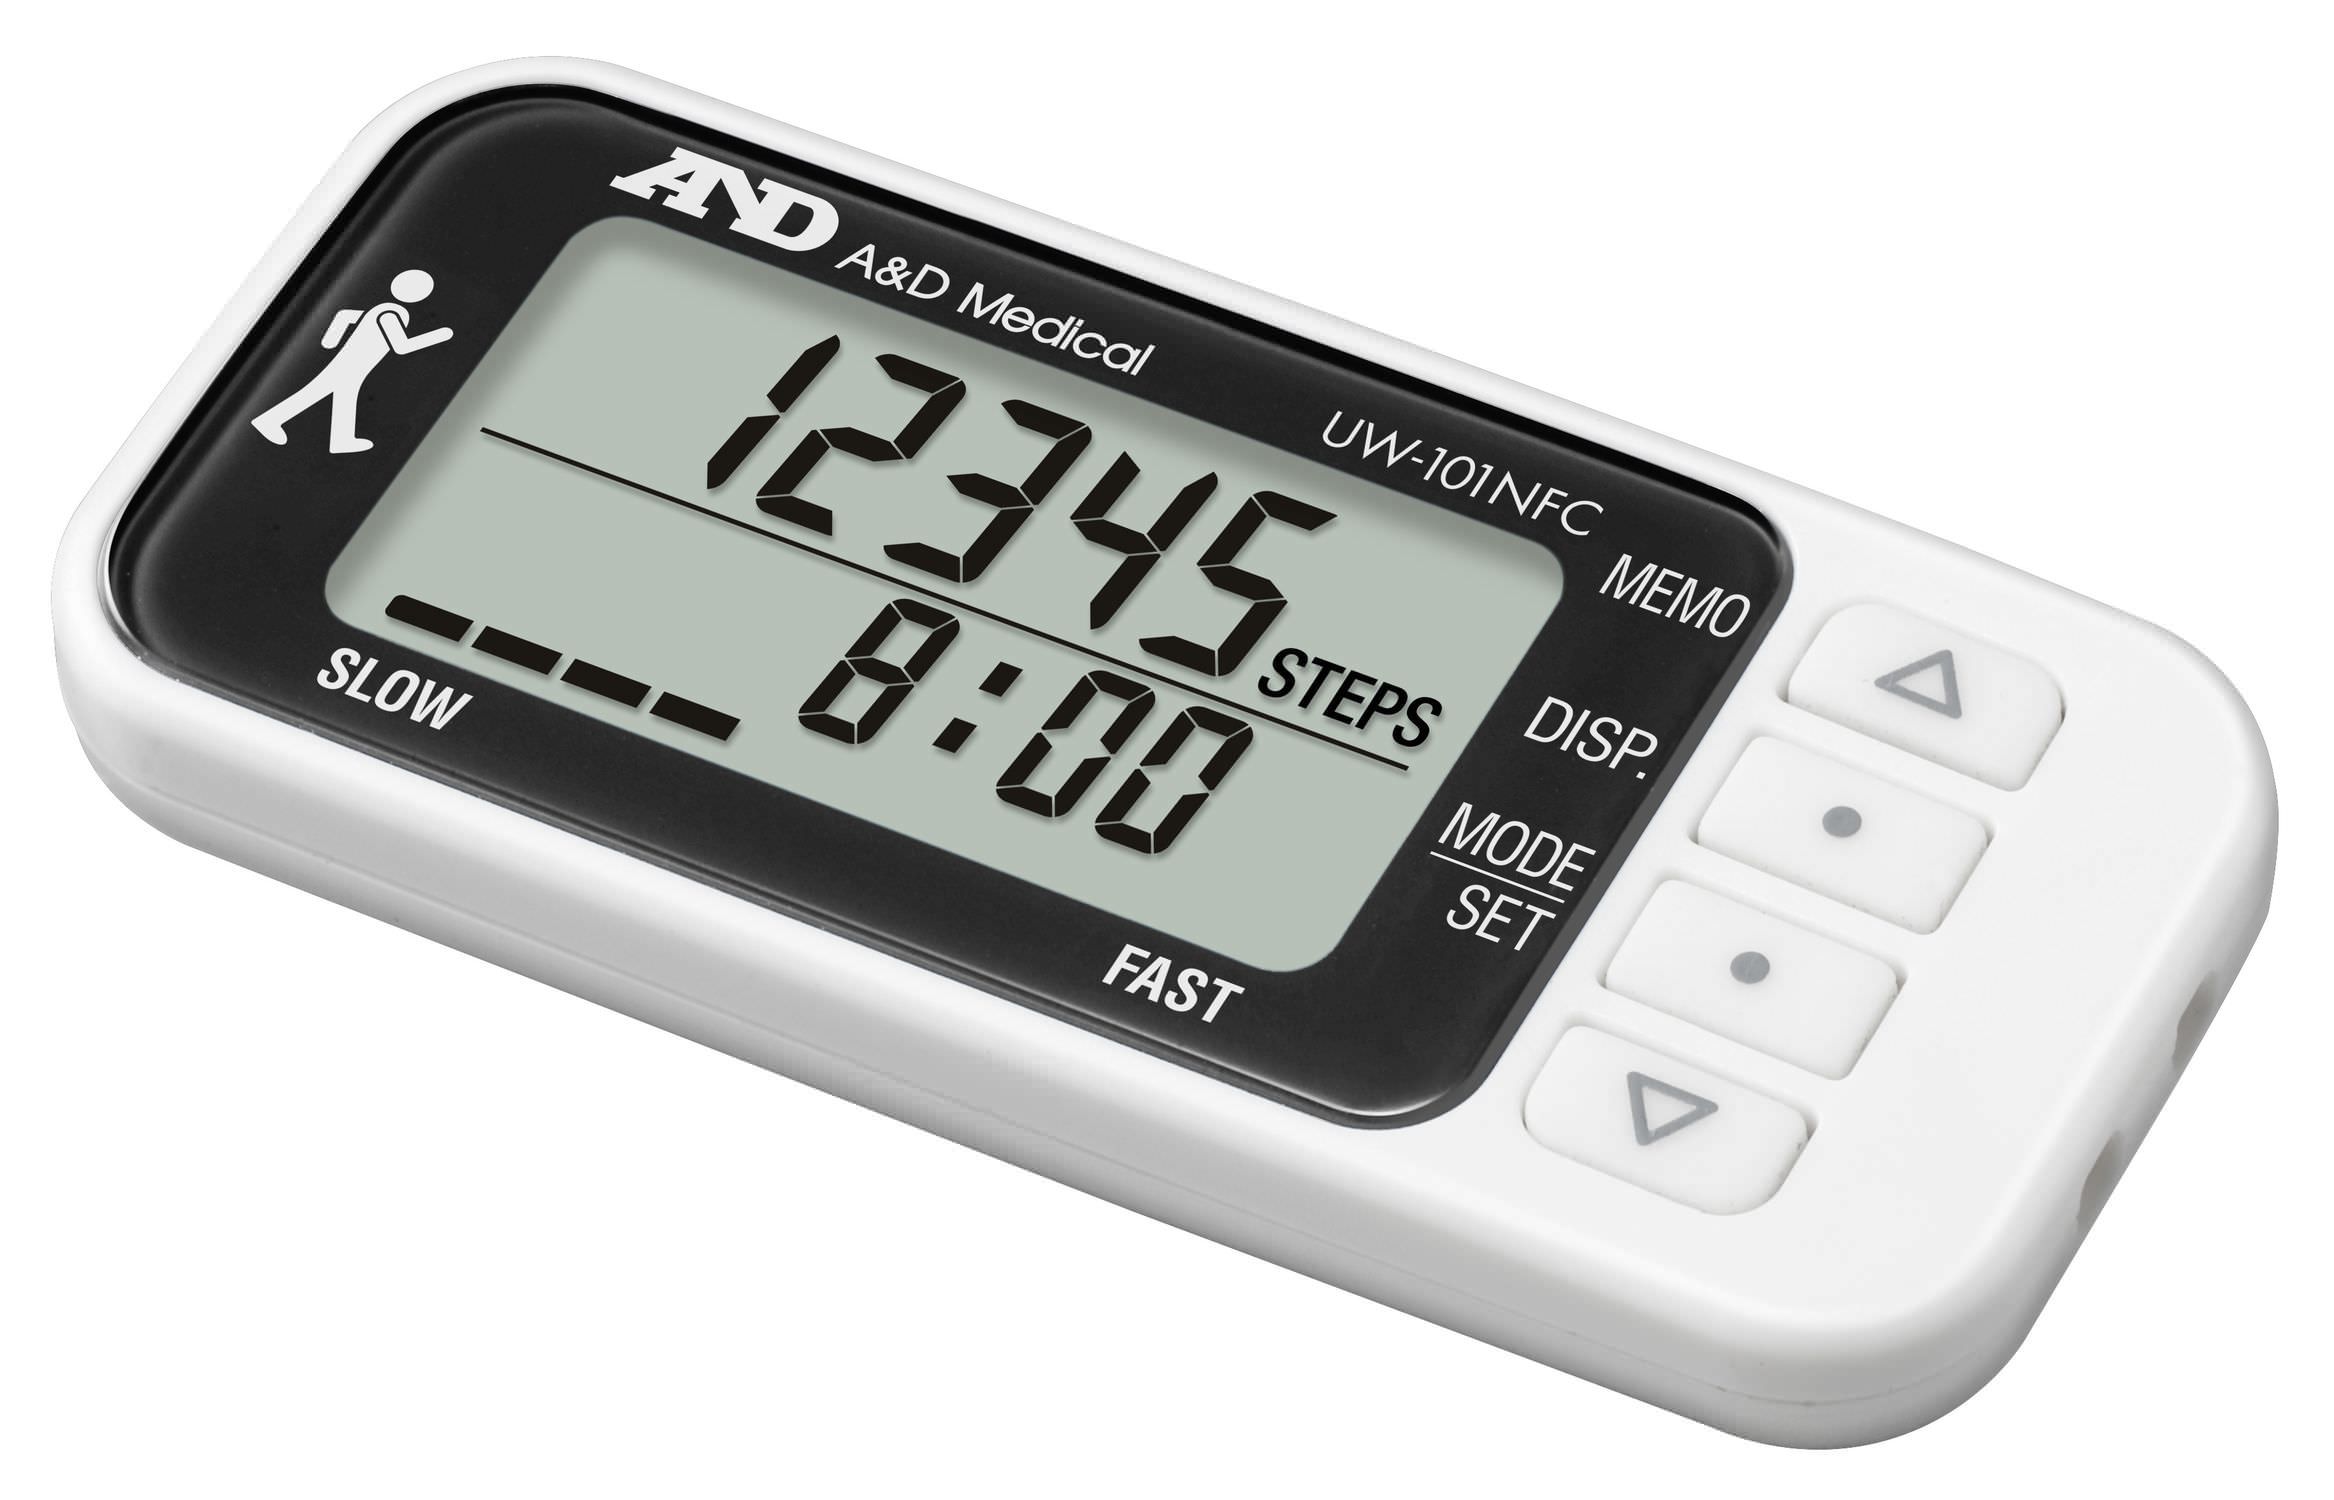 Pedometer with 3-axis sensor / thin / with calorie counter UW-101NFC A&D Company, Limited